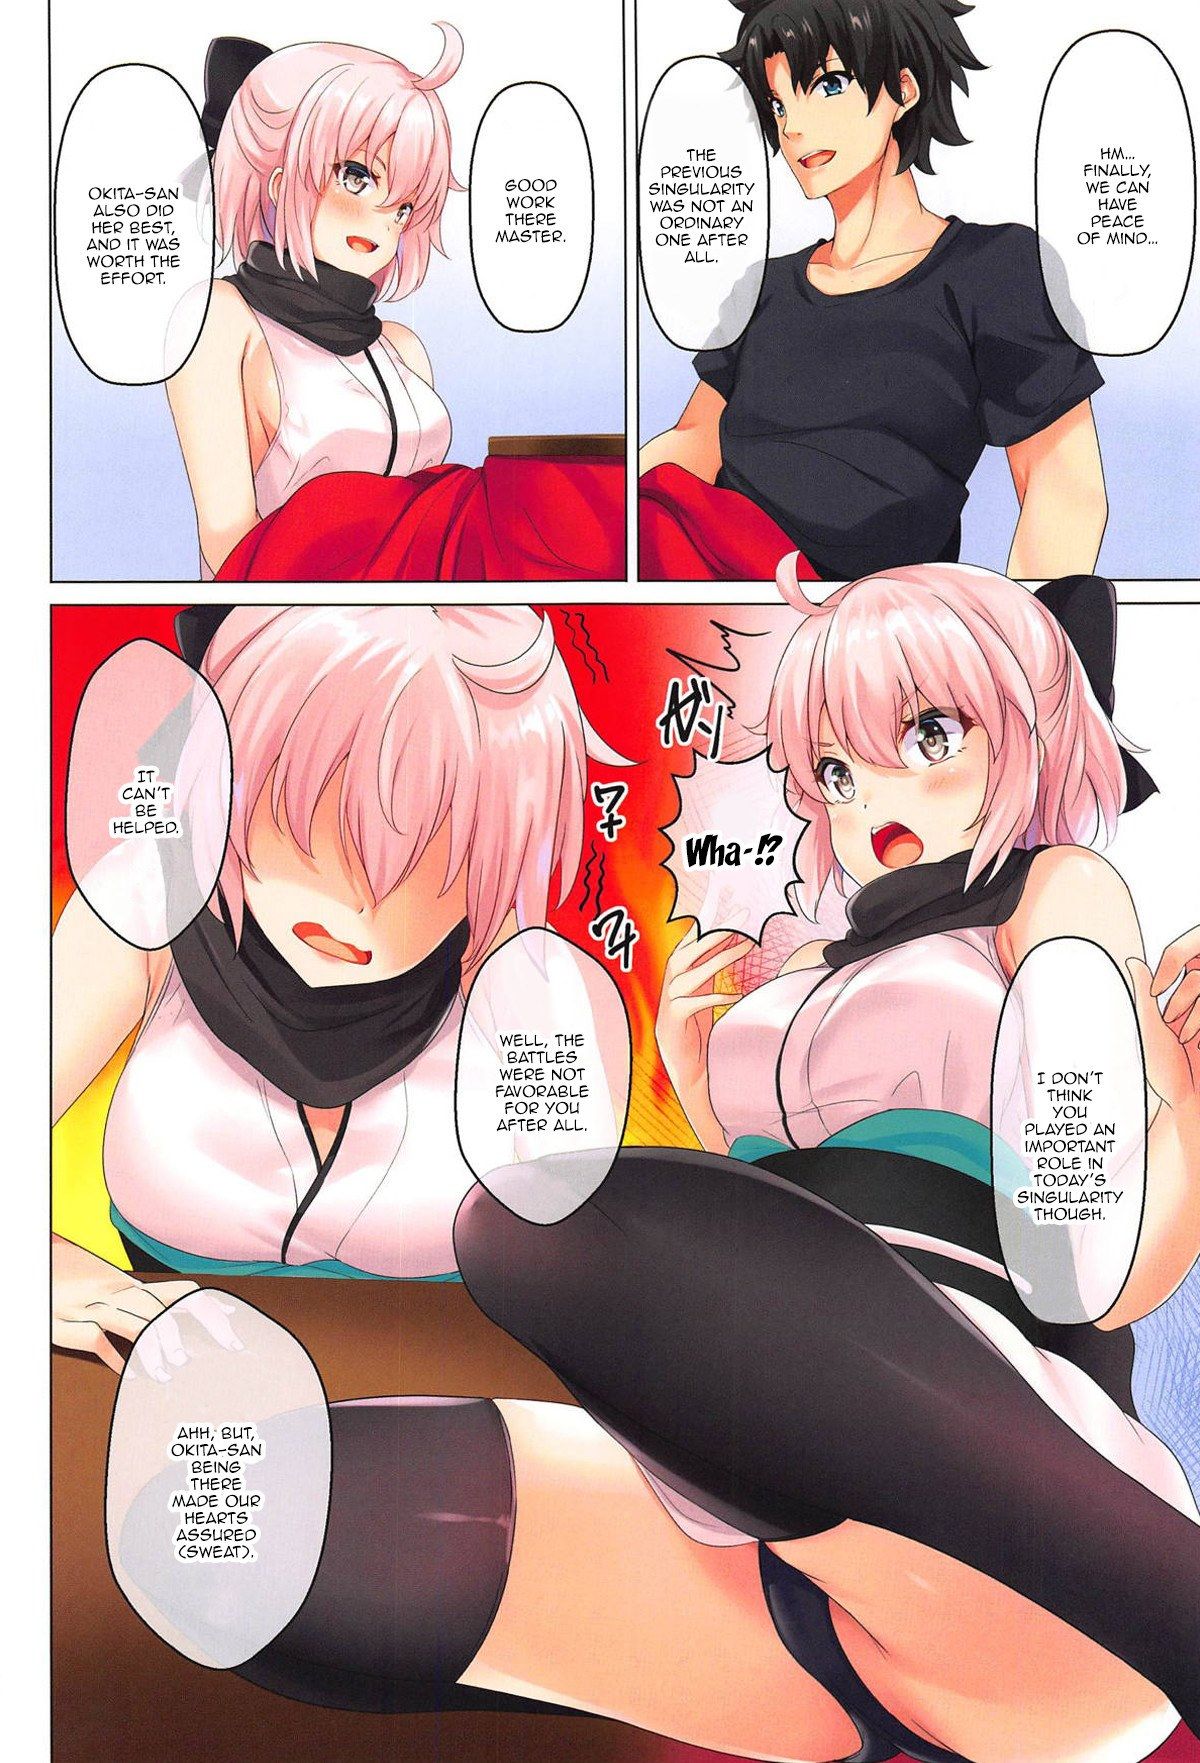 Warming Up With Okita San by Soramoti (Fate Grand Order) page 3